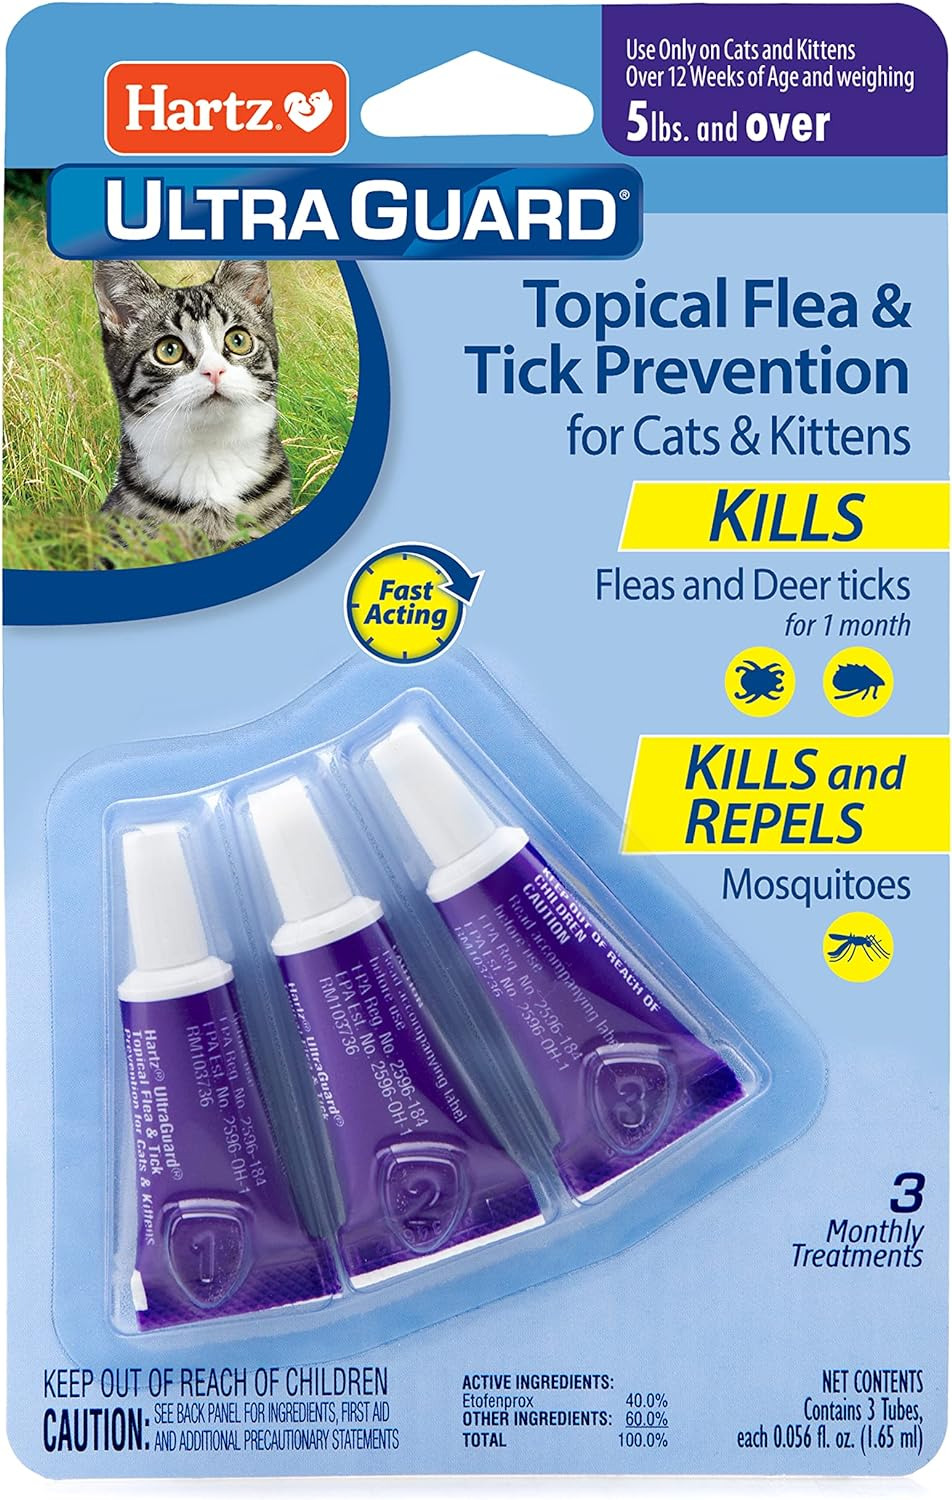 Flea Treatment Medicine For Cats Kittens Drops Meds Remedy Tick Control Topical